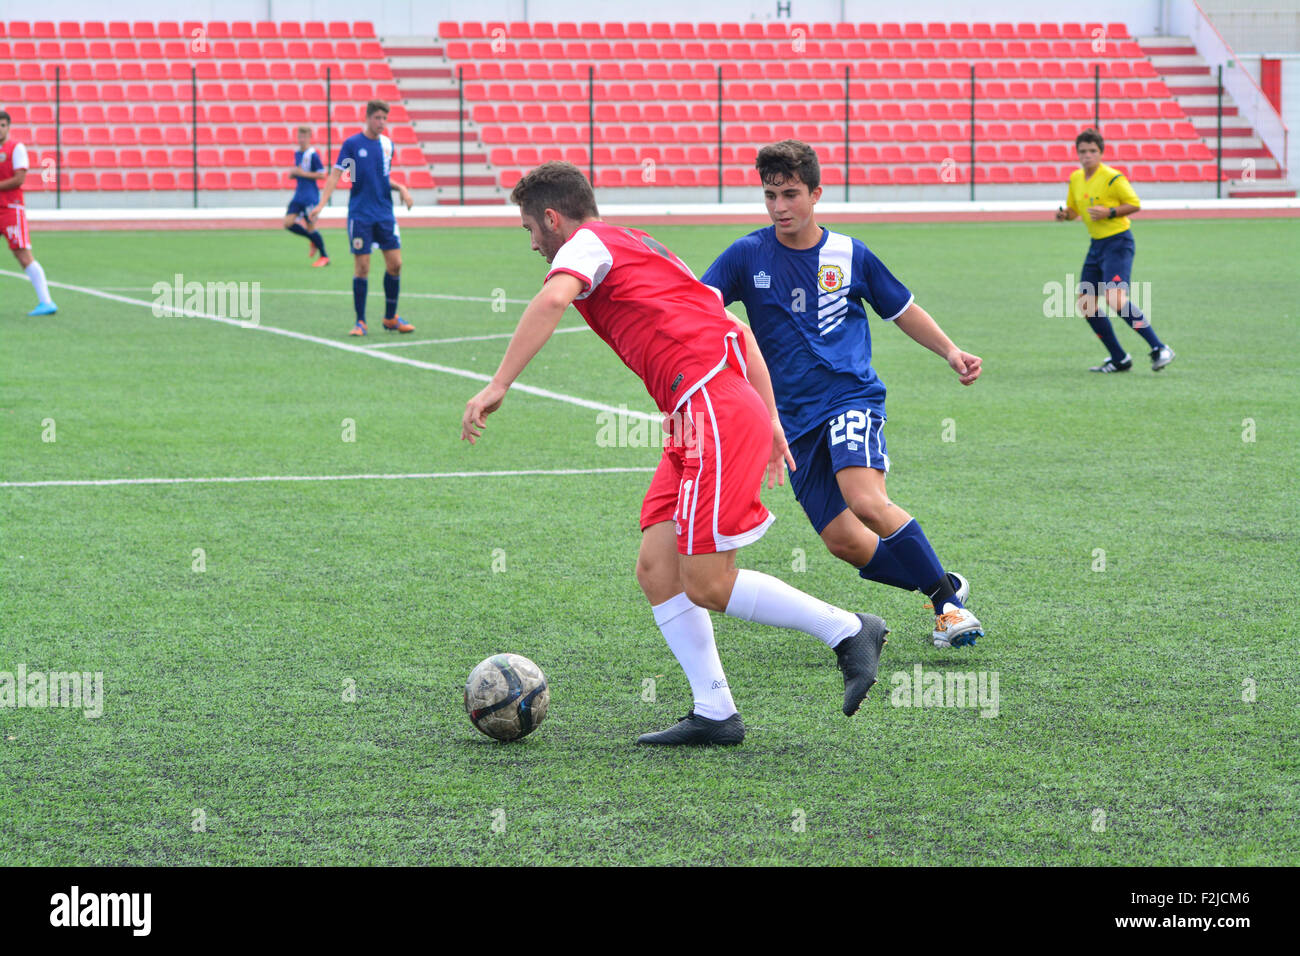 Gibraltar. 20th September, 2015. As part of the Gibraltar FA Grassroots day the National Squads for both the Under 19 and Under 17 faced off at the Victoria Stadium. In a tough fought, competitive match the Under 19s came out eventual winners by 3-0. The match was overseen by National senor squad manager Jeff Wood who from the sidelines tok a keen interest on the developing squads. Credit:  Stephen Ignacio/Alamy Live News Stock Photo